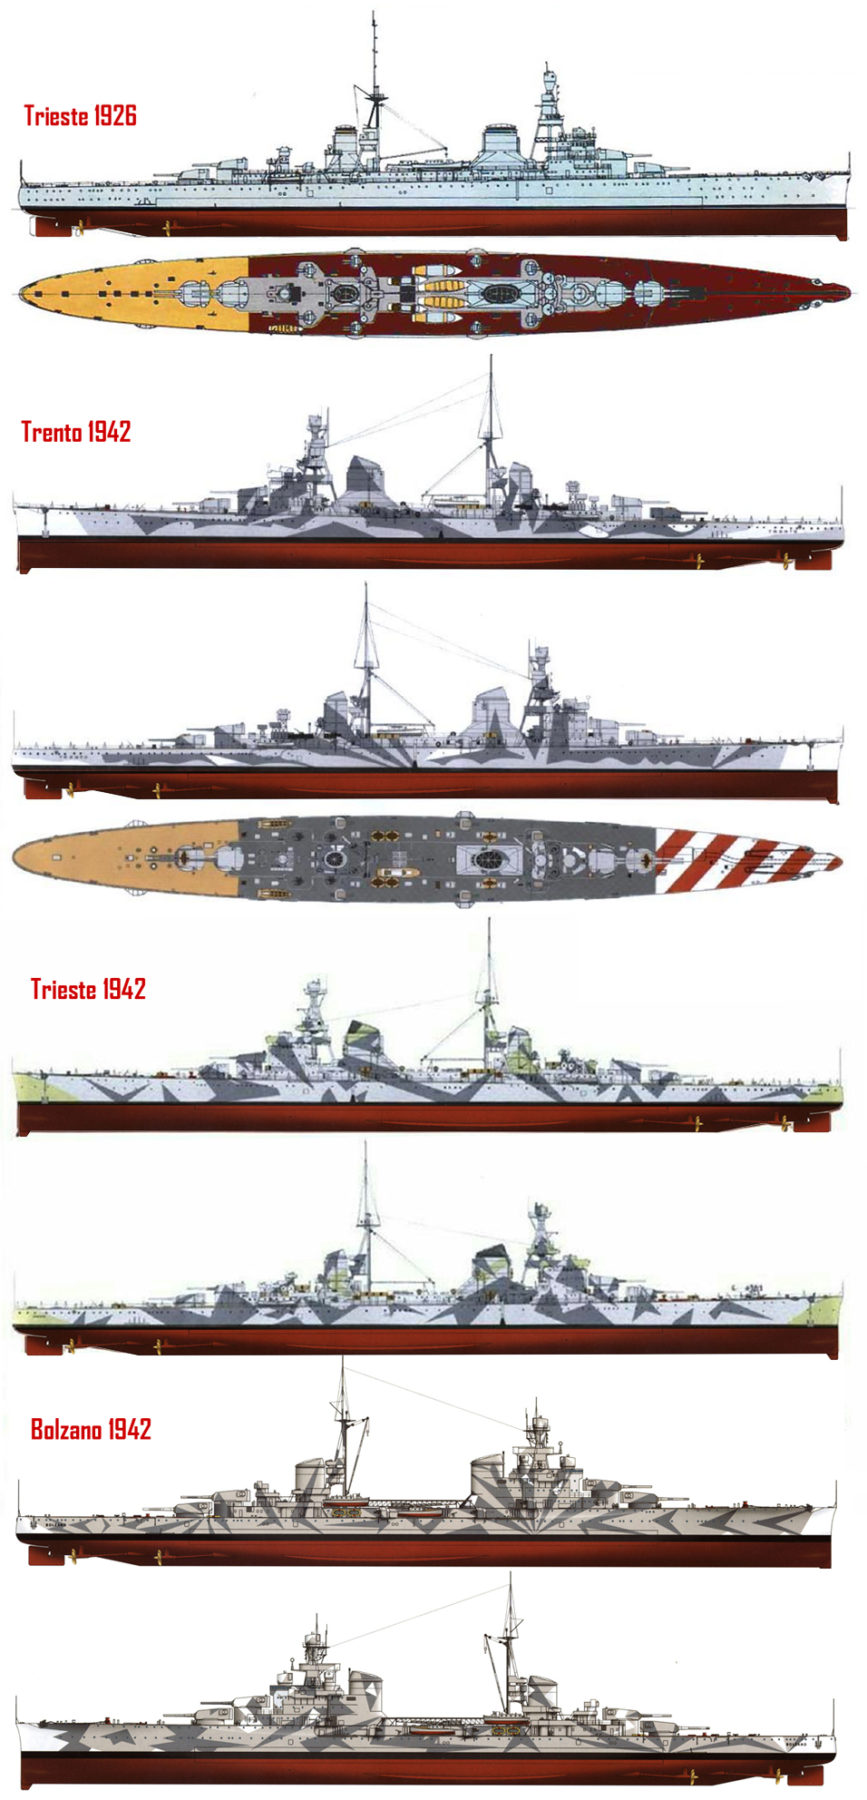 Camouflage Liveries of the Trento, Trieste and Bolzano from model kits